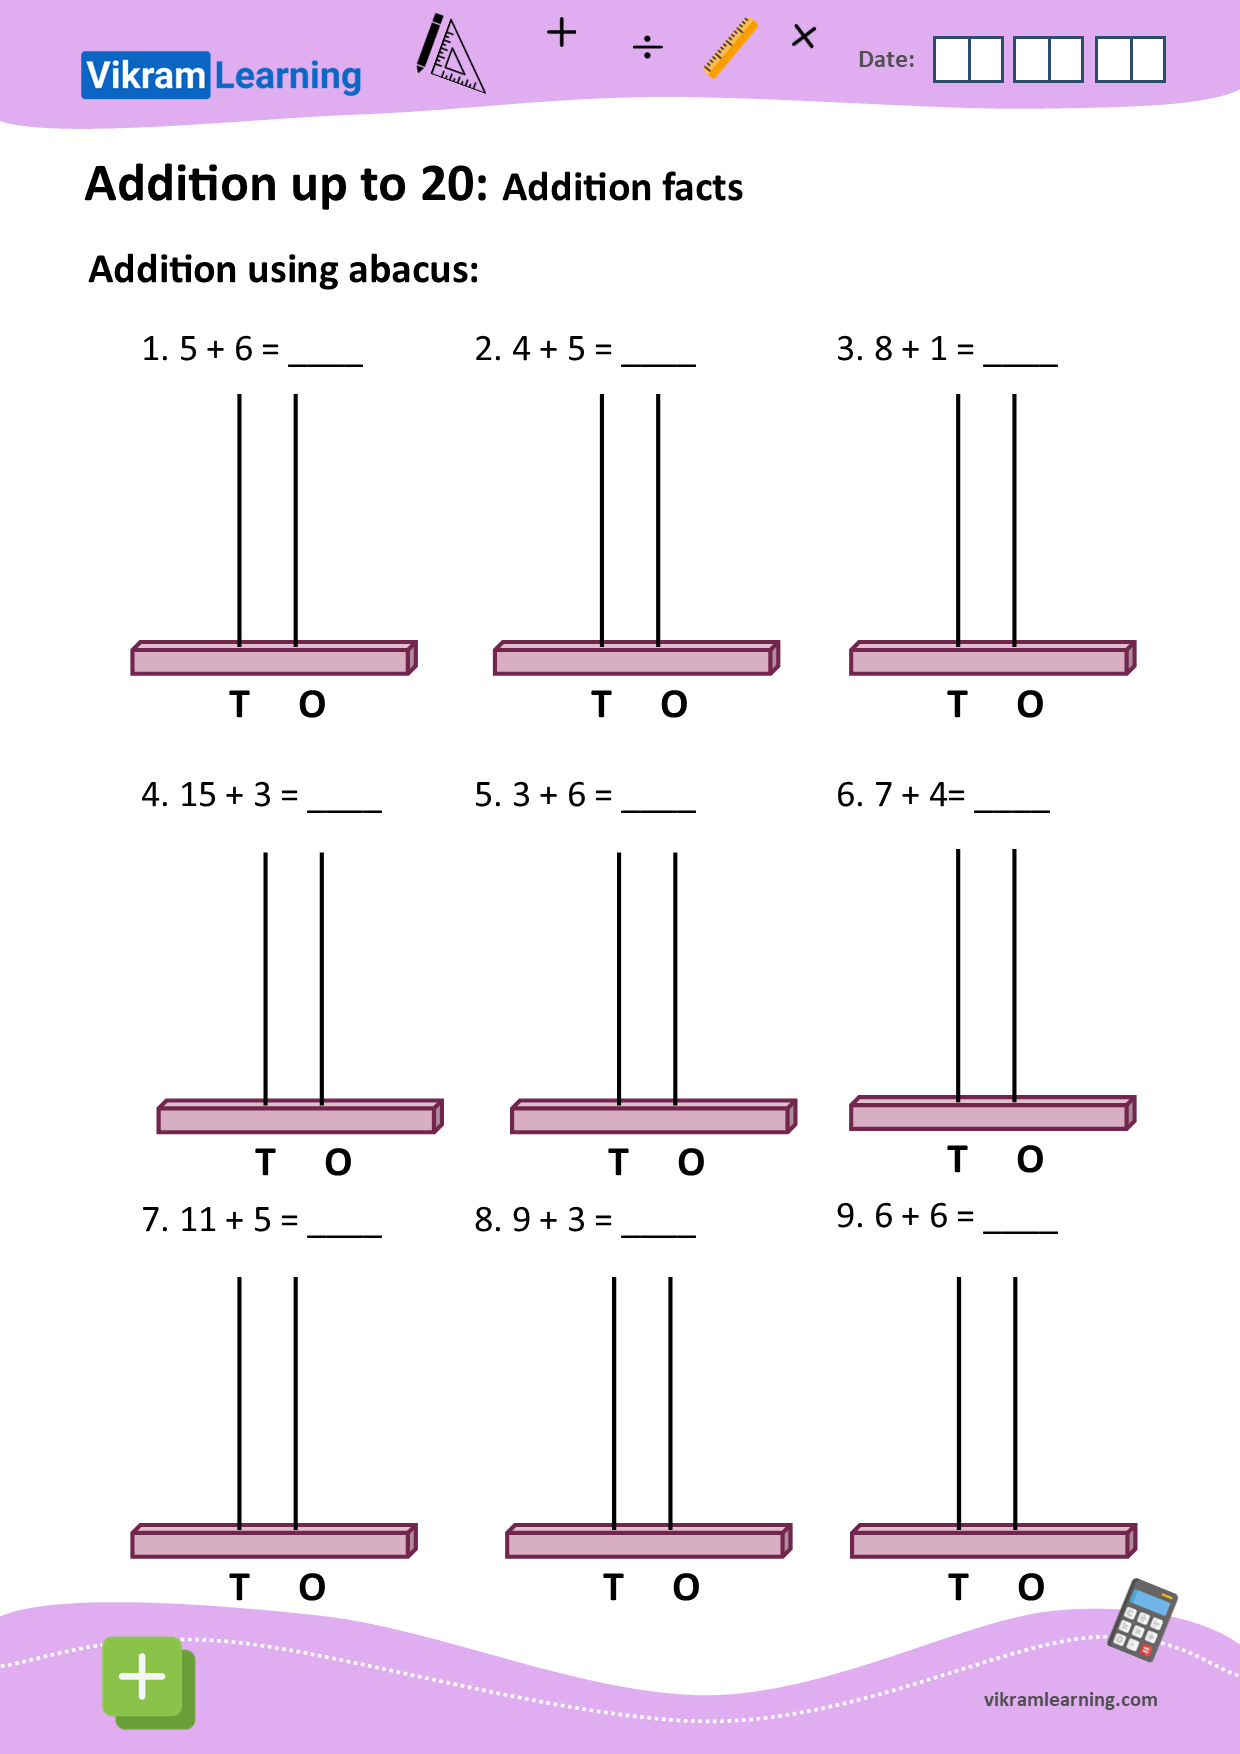 Download addition up to 20 using abacus worksheets